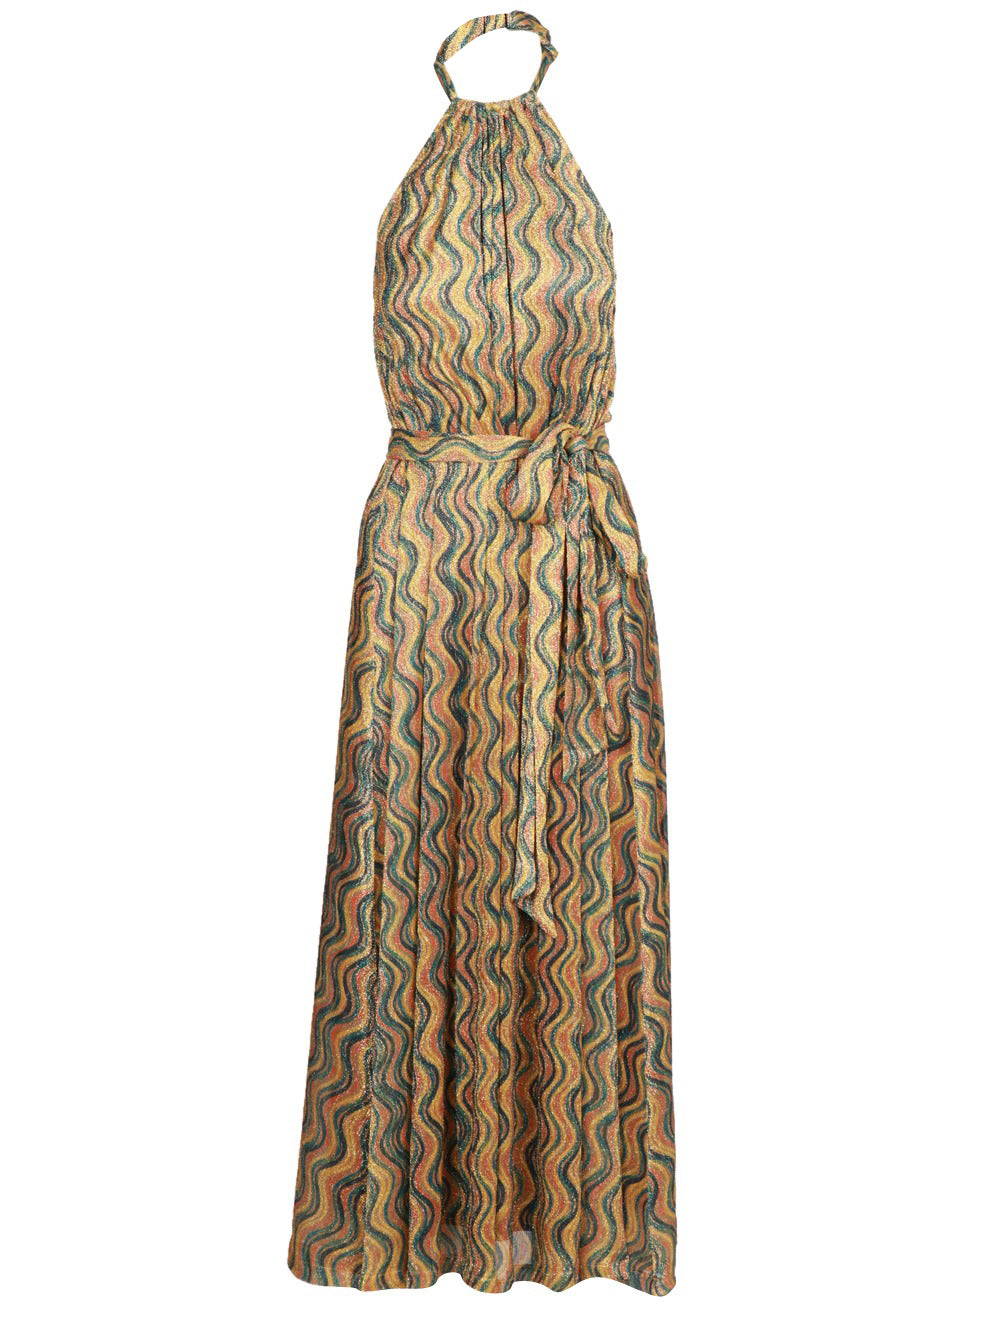 Long Dress with Gold, Blue and Orange Pattern with Lurex